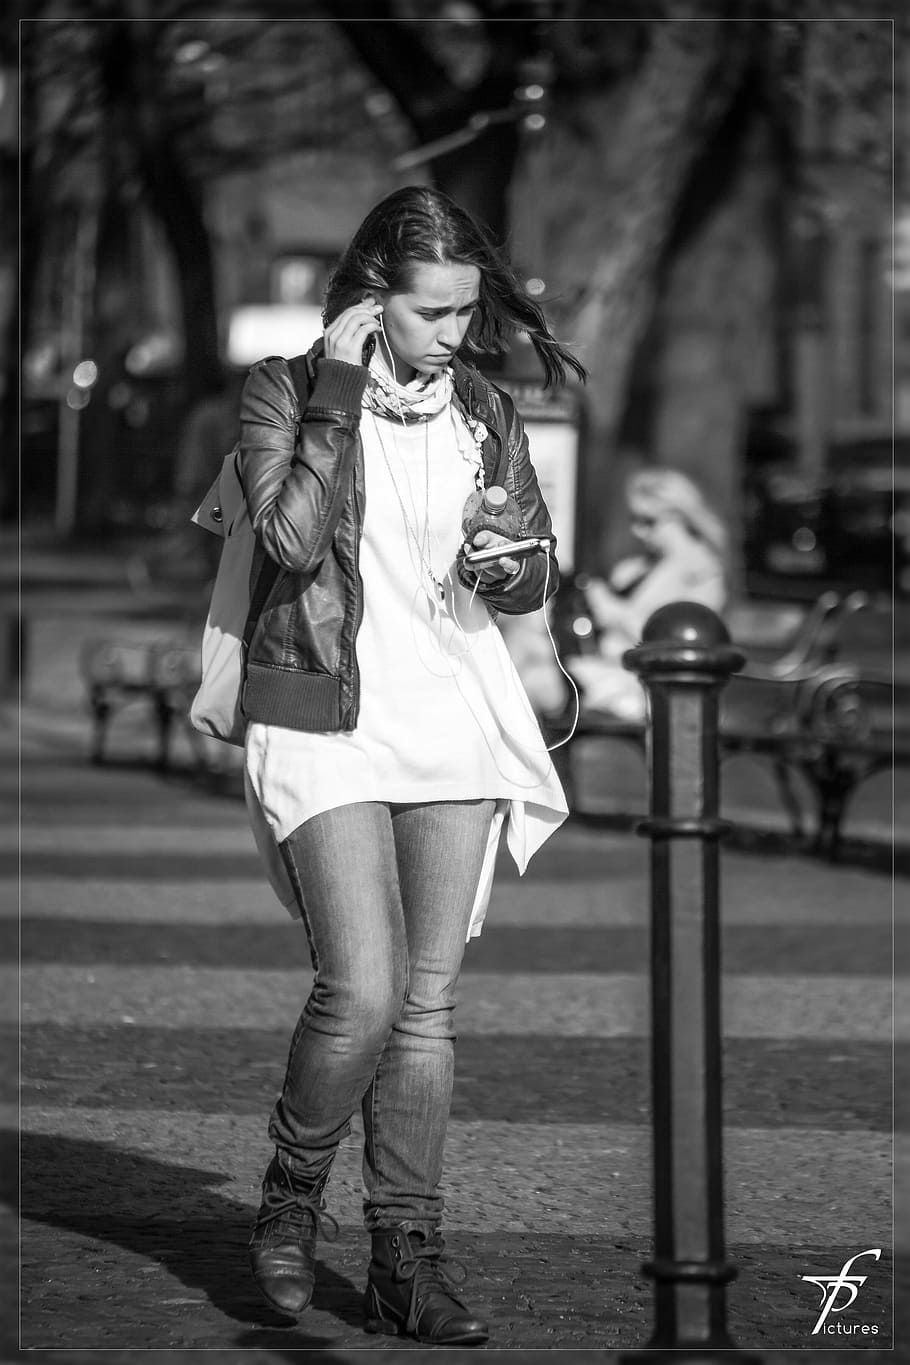 Girl, Woman, Street Life, Downtown, black and white, ipod, listening, earphones, young adult, one person